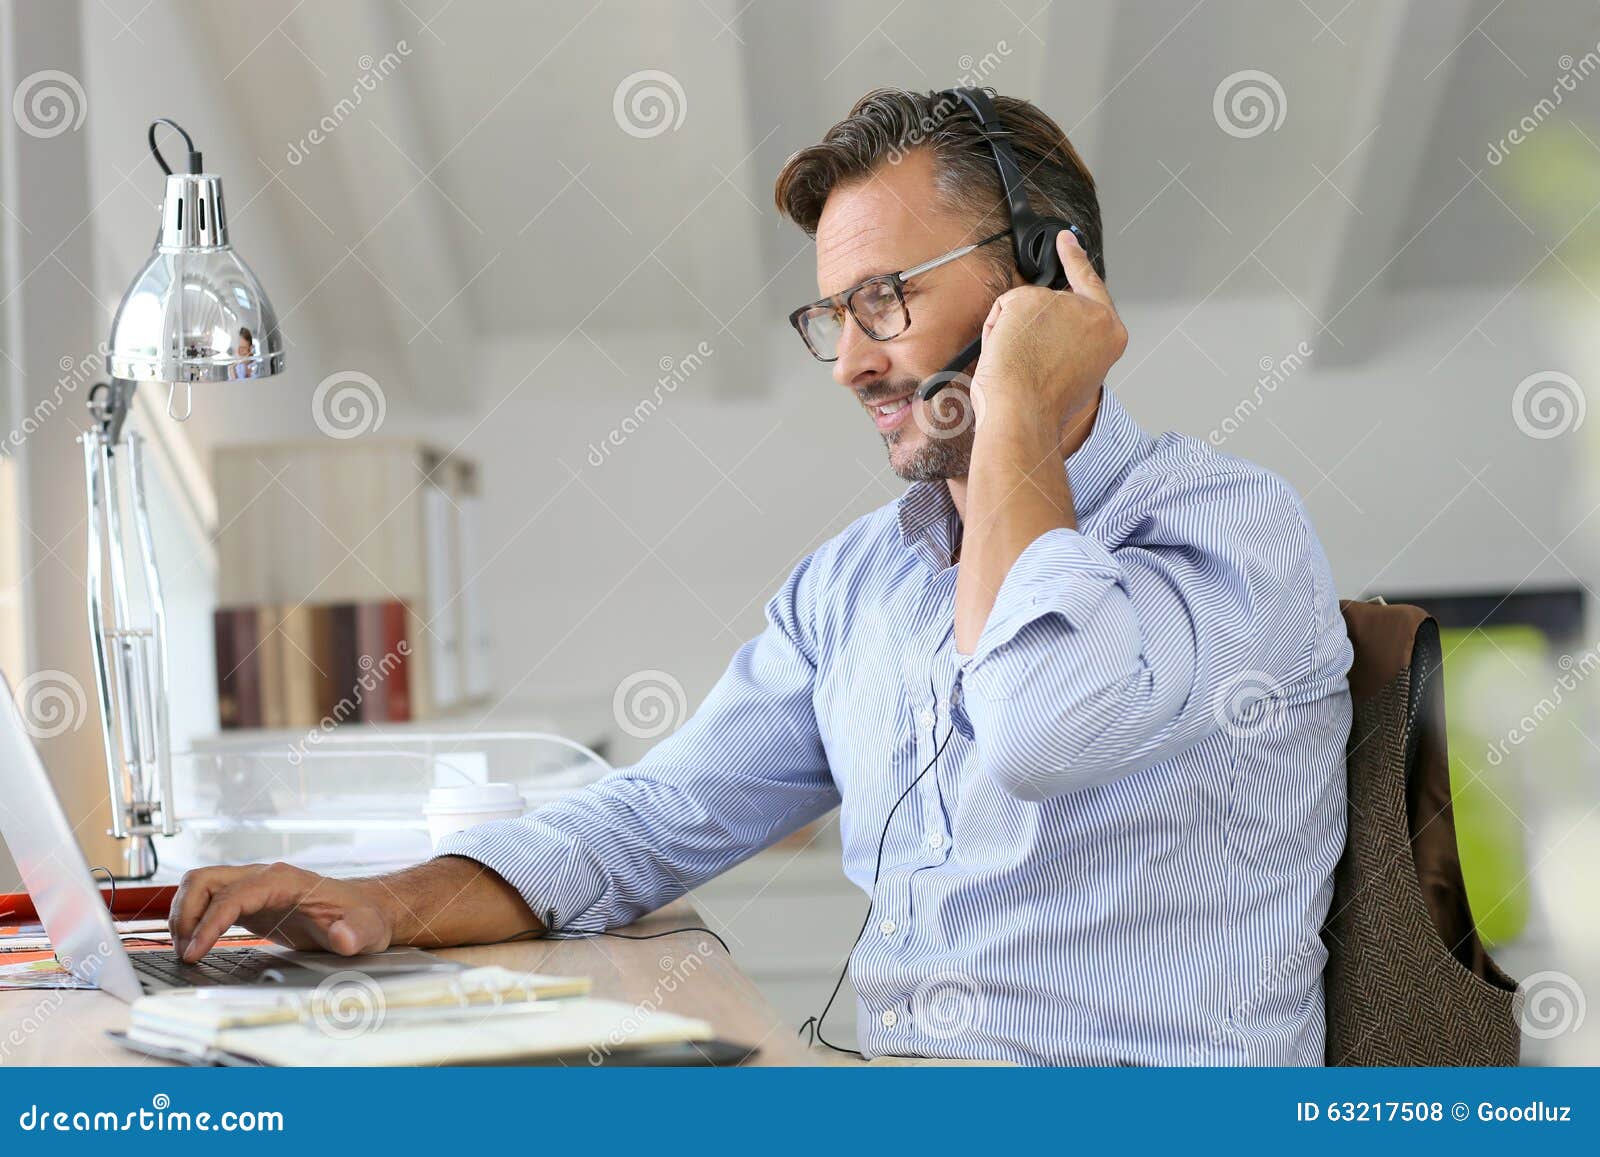 businessman teleworking with headset on laptop